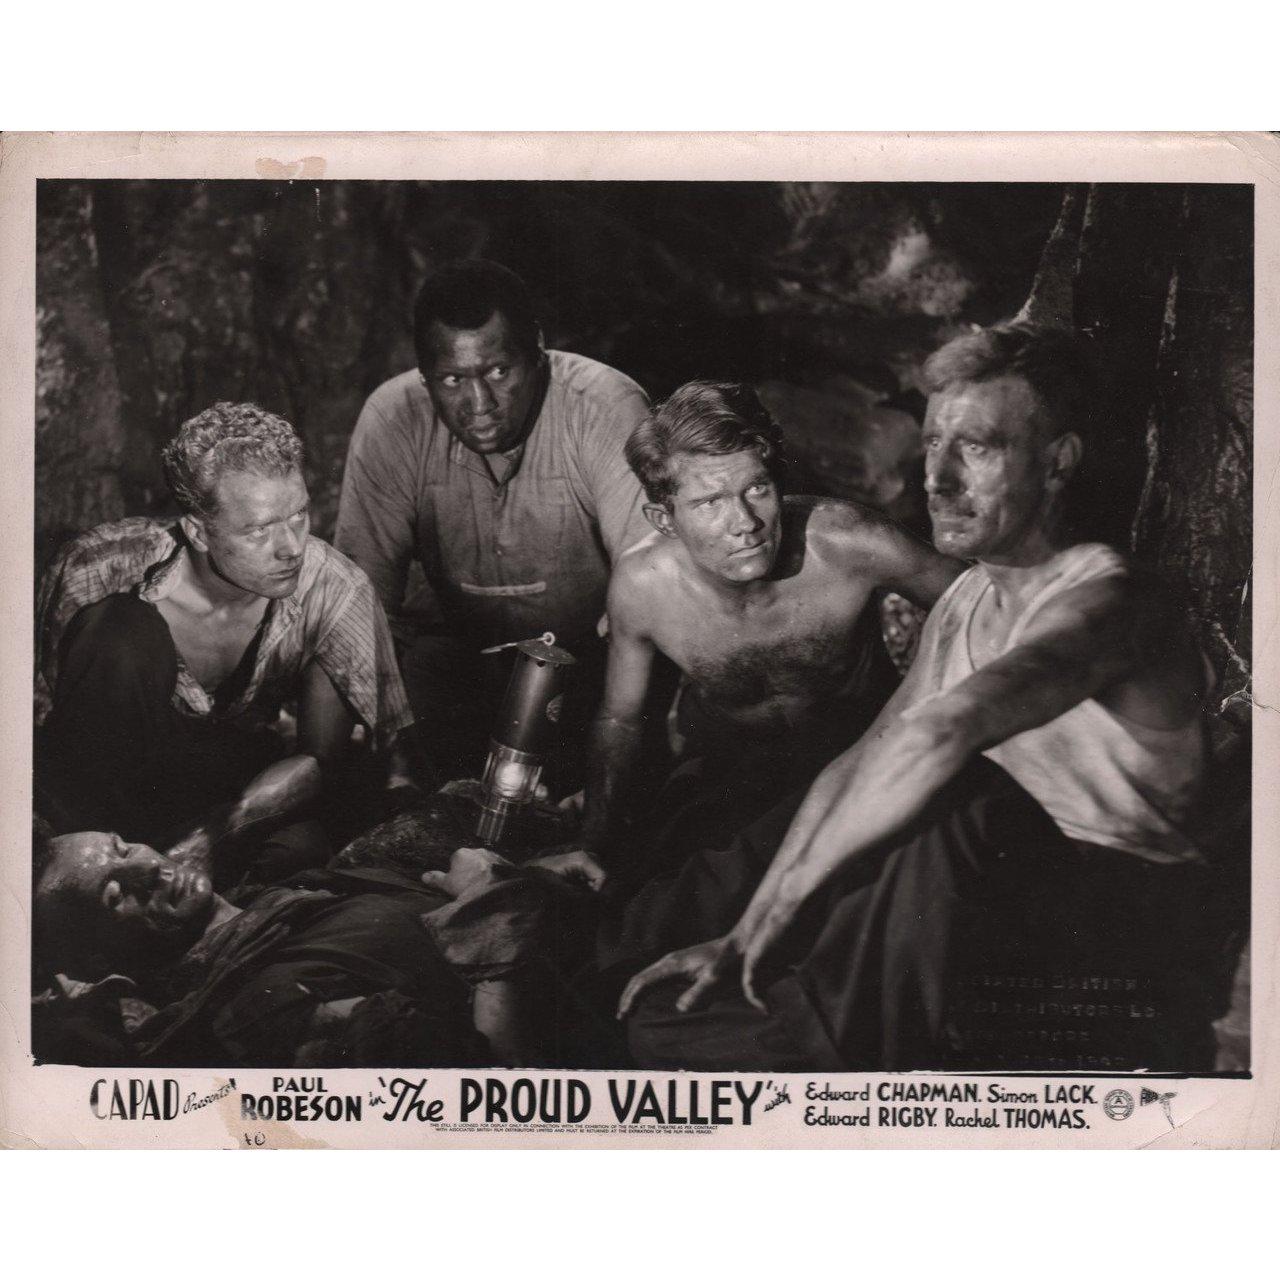 Original 1940 British silver gelatin single-weight photo for the film The Proud Valley directed by Pen Tennyson with Paul Robeson / Edward Chapman / Simon Lack / Rachel Thomas. Very good-fine condition. Please note: the size is stated in inches and